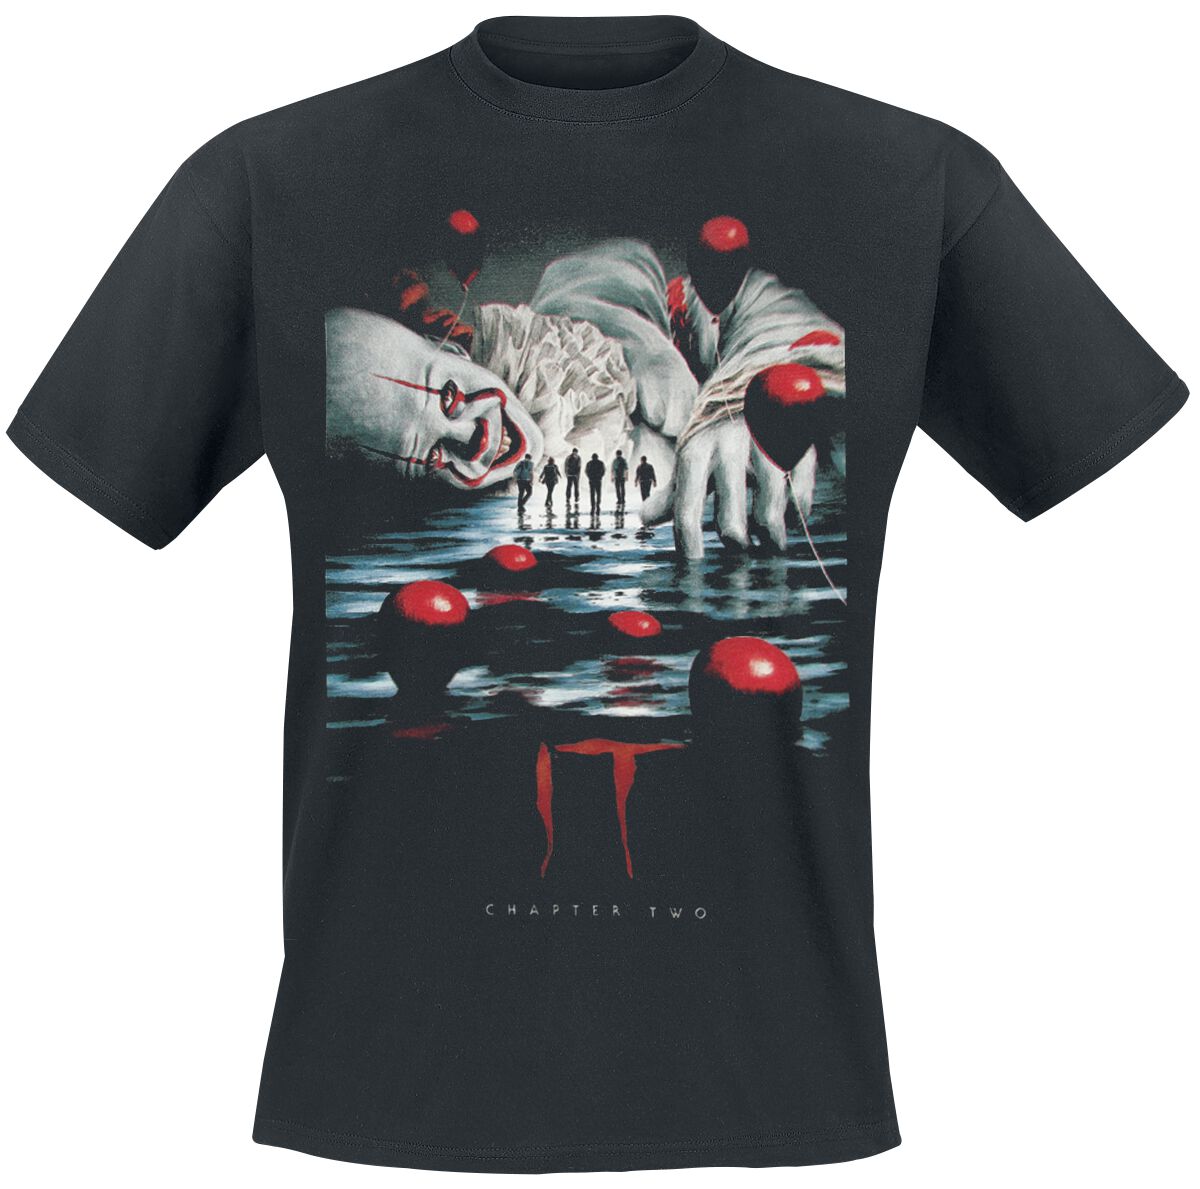 IT Chapter 2 - Pennywise T-Shirt black